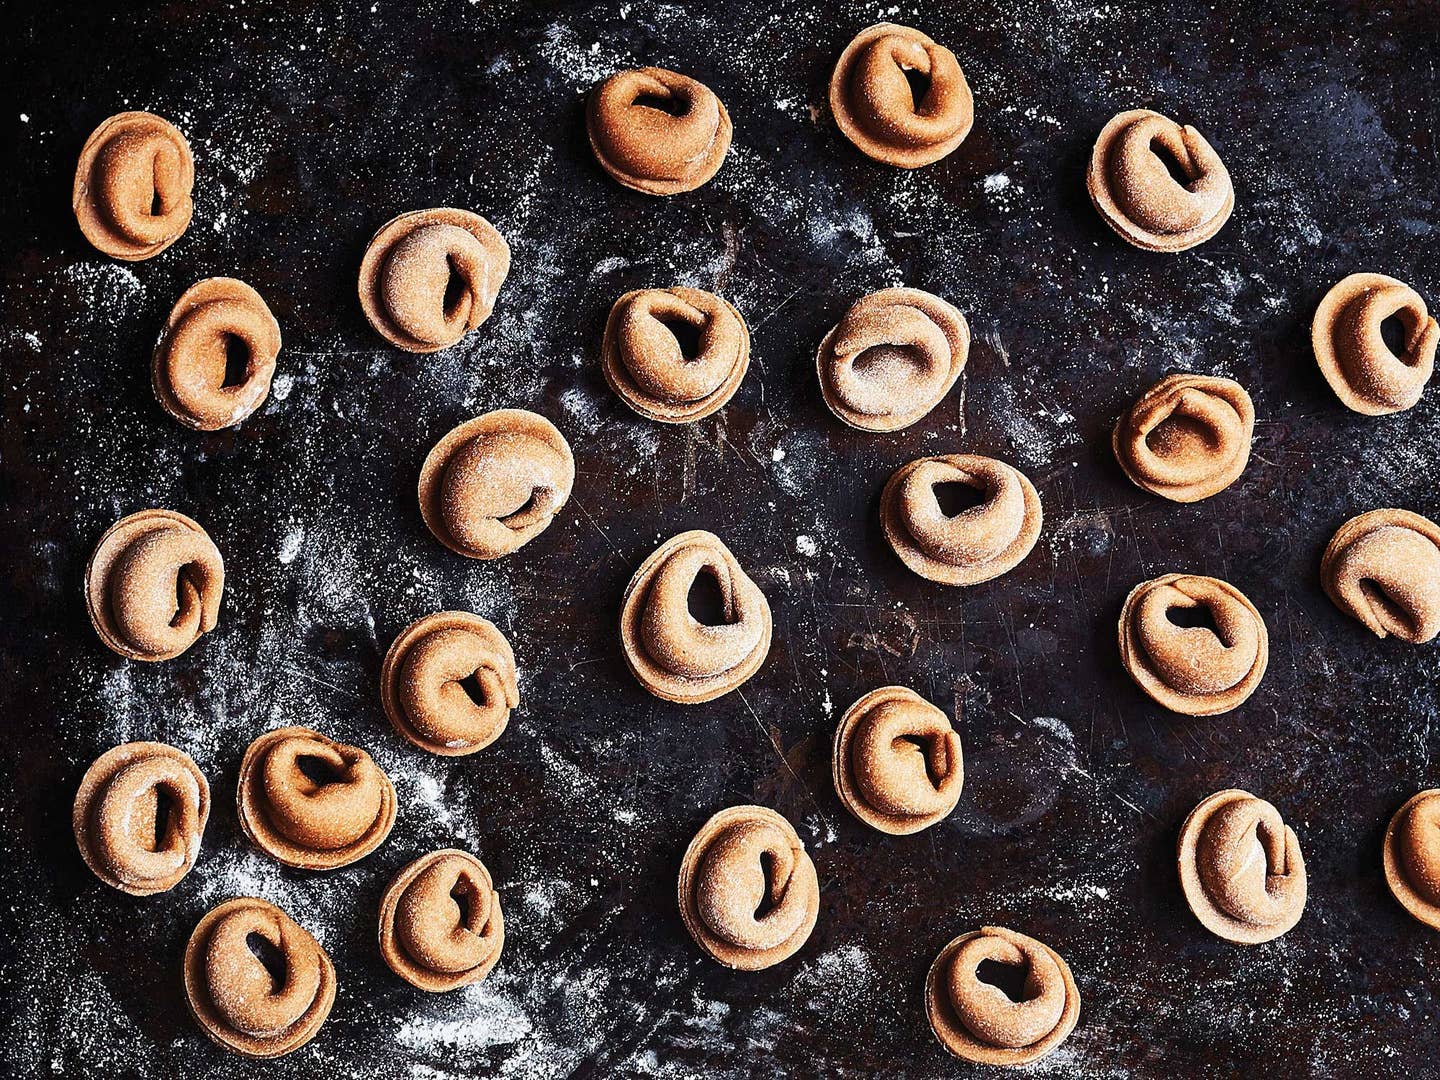 Stop Ignoring Chestnuts and Make These Excellent Tortellini